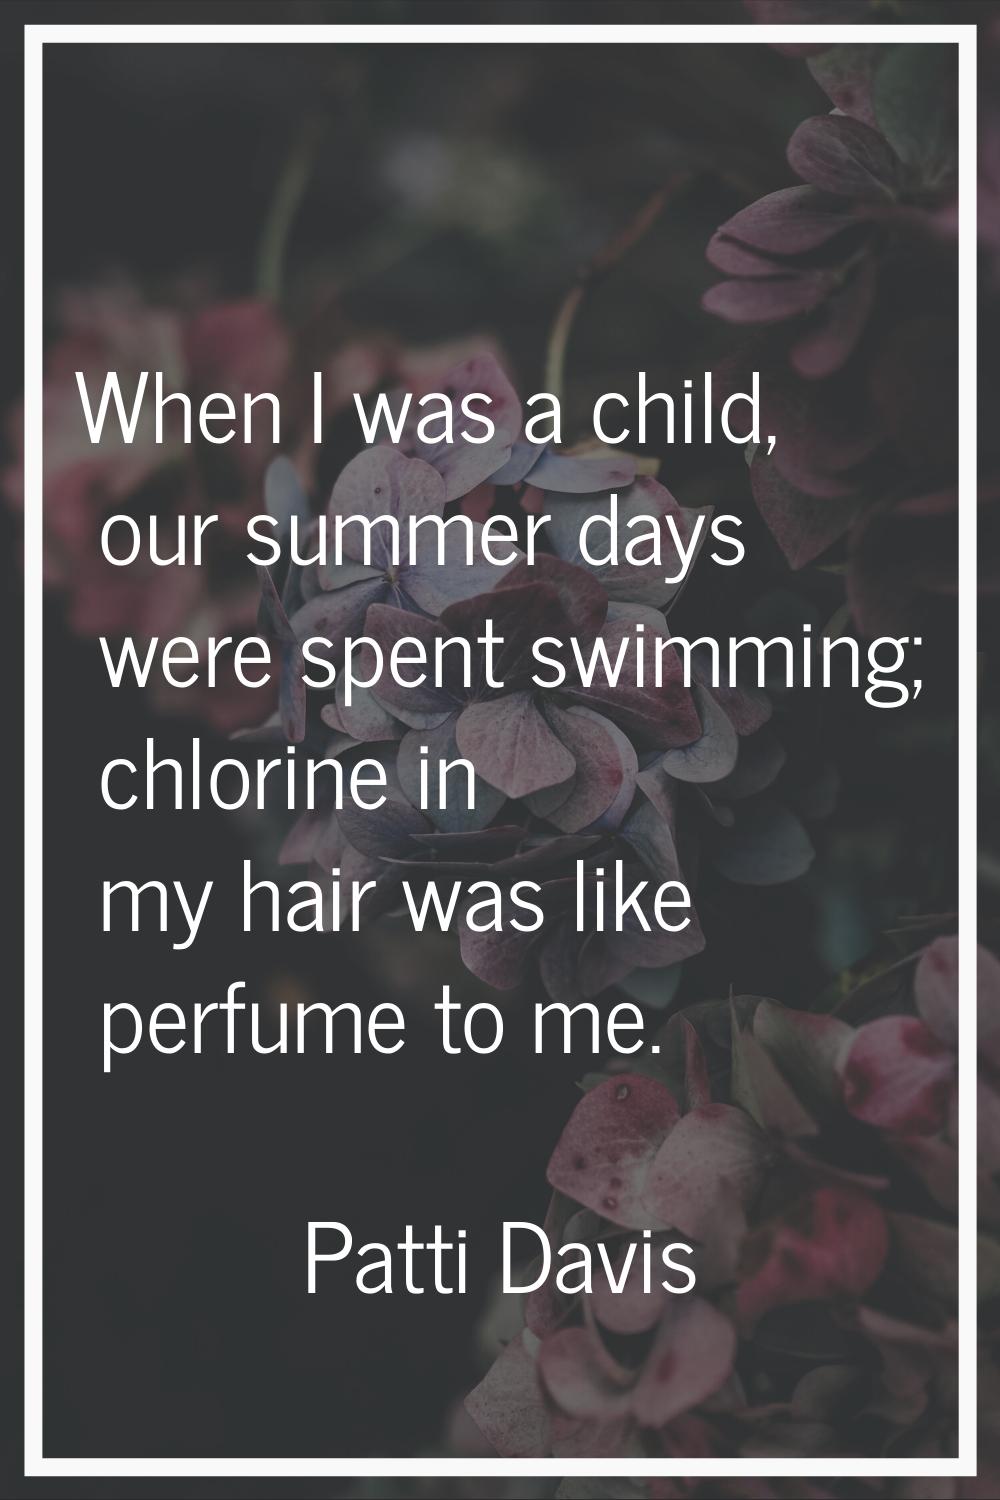 When I was a child, our summer days were spent swimming; chlorine in my hair was like perfume to me